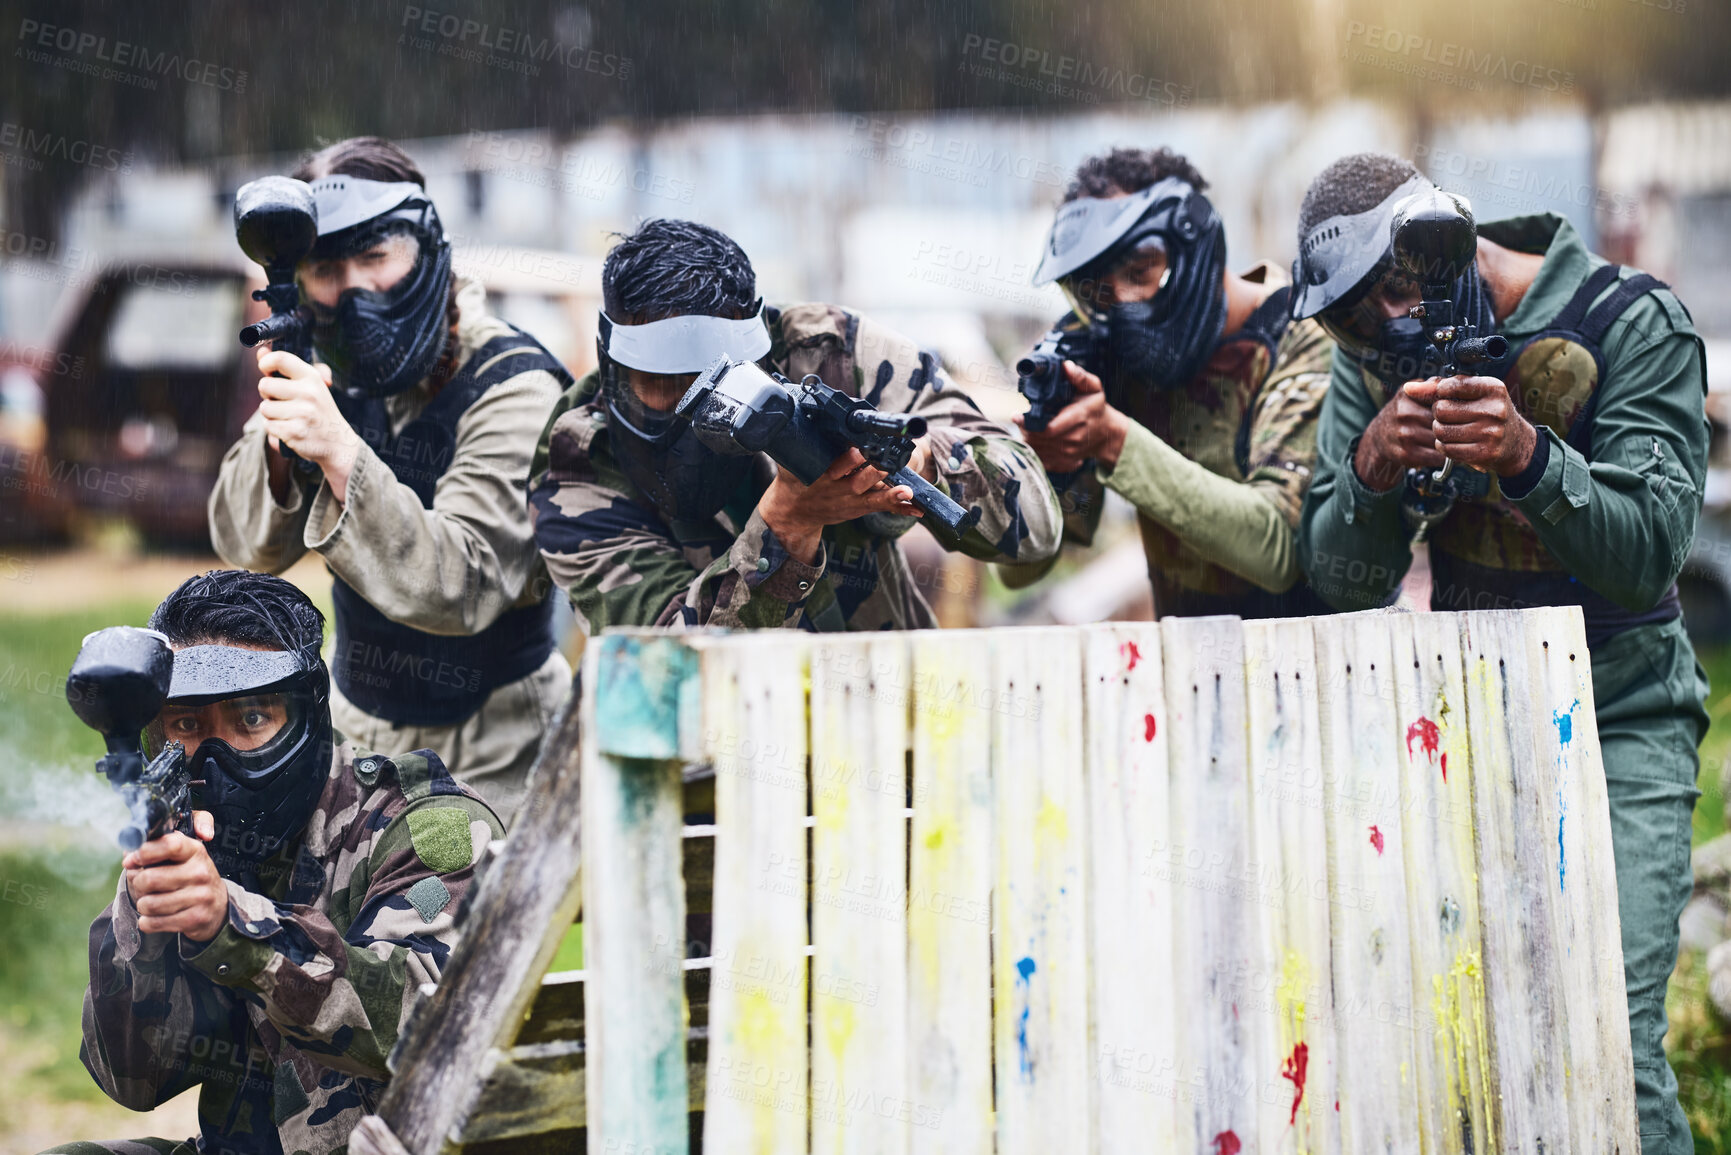 Buy stock photo Paintball, gun or team play in a shooting game together on a fun battlefield on holiday. Men on a mission, fitness or players aim with military weapons gear for survival in an outdoor competition